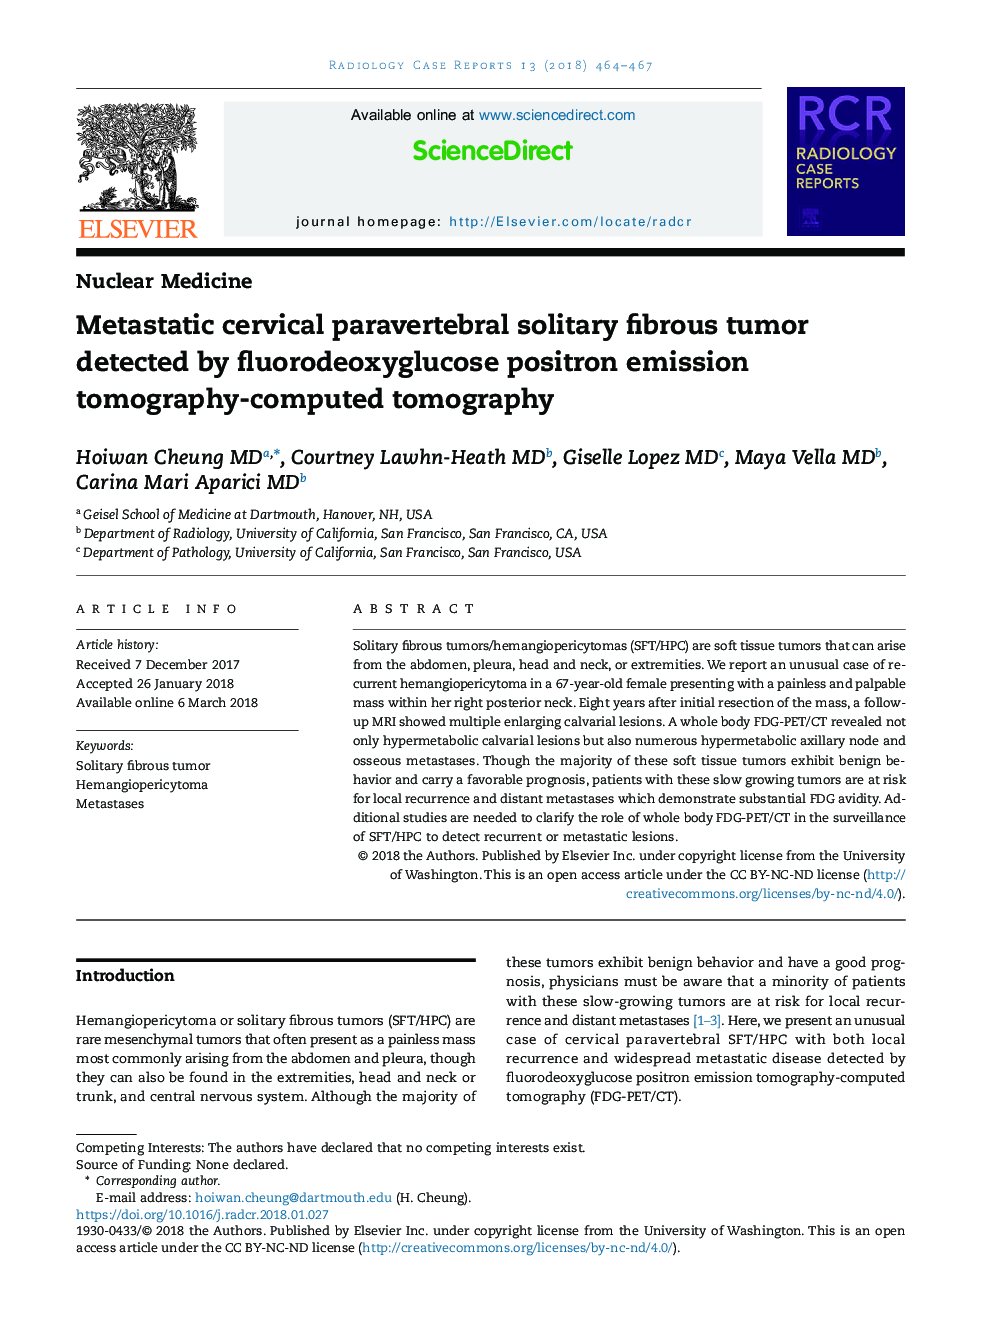 Metastatic cervical paravertebral solitary fibrous tumor detected by fluorodeoxyglucose positron emission tomography-computed tomography